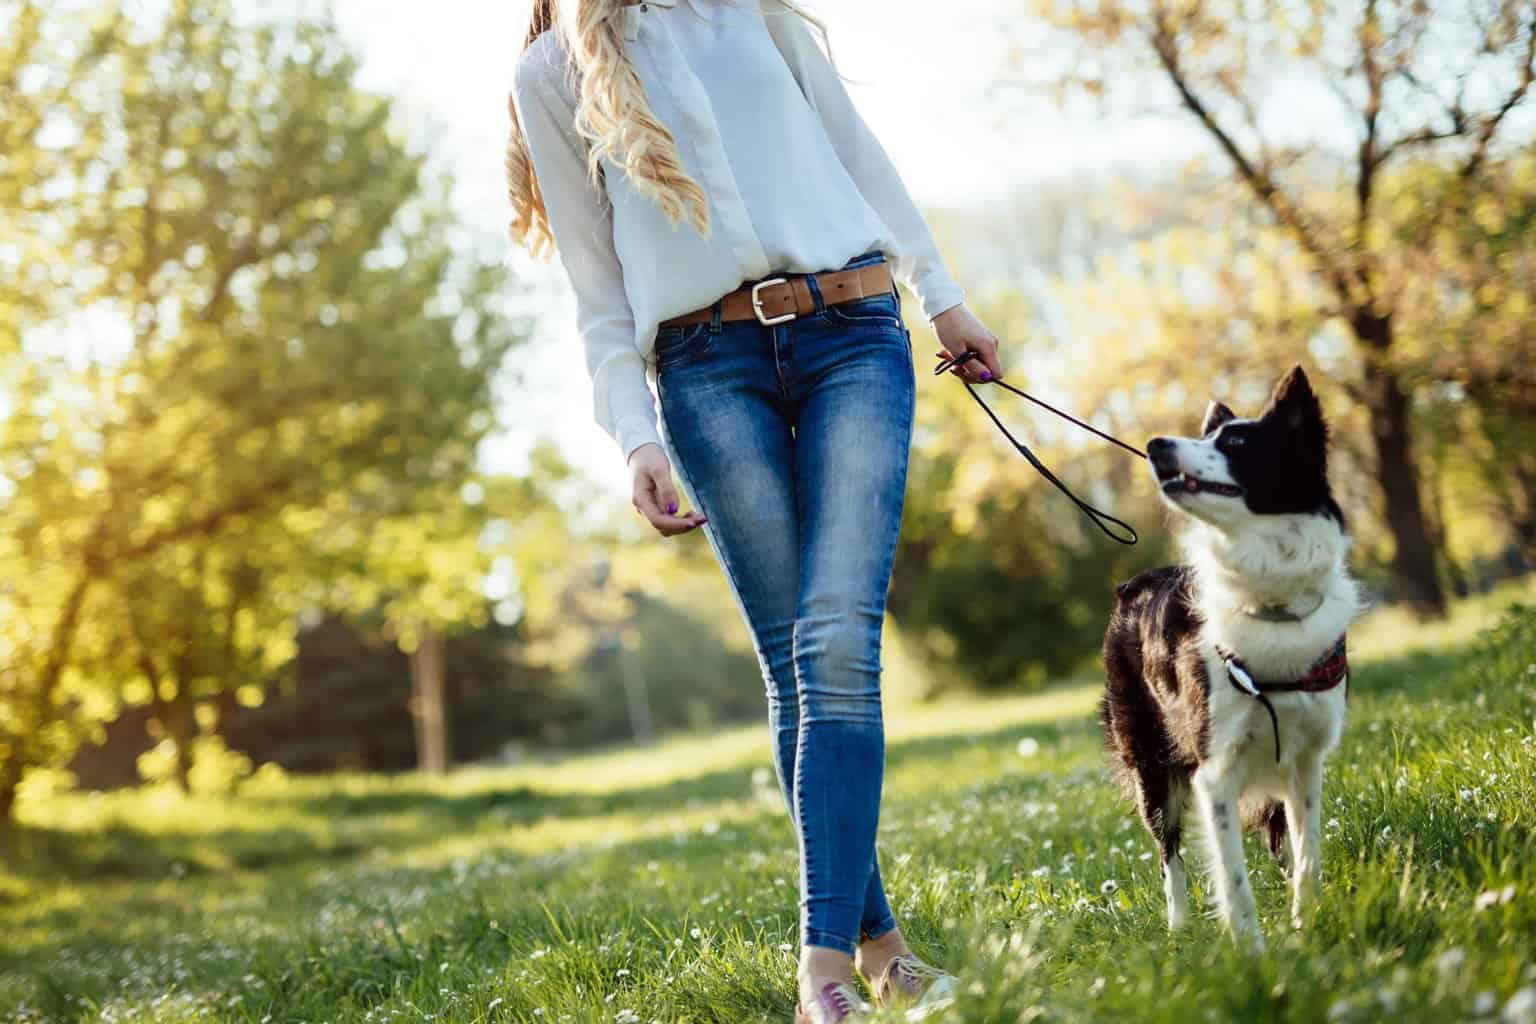 Woman walks dog. Choose a spot with few distractions for a successful dog walk.